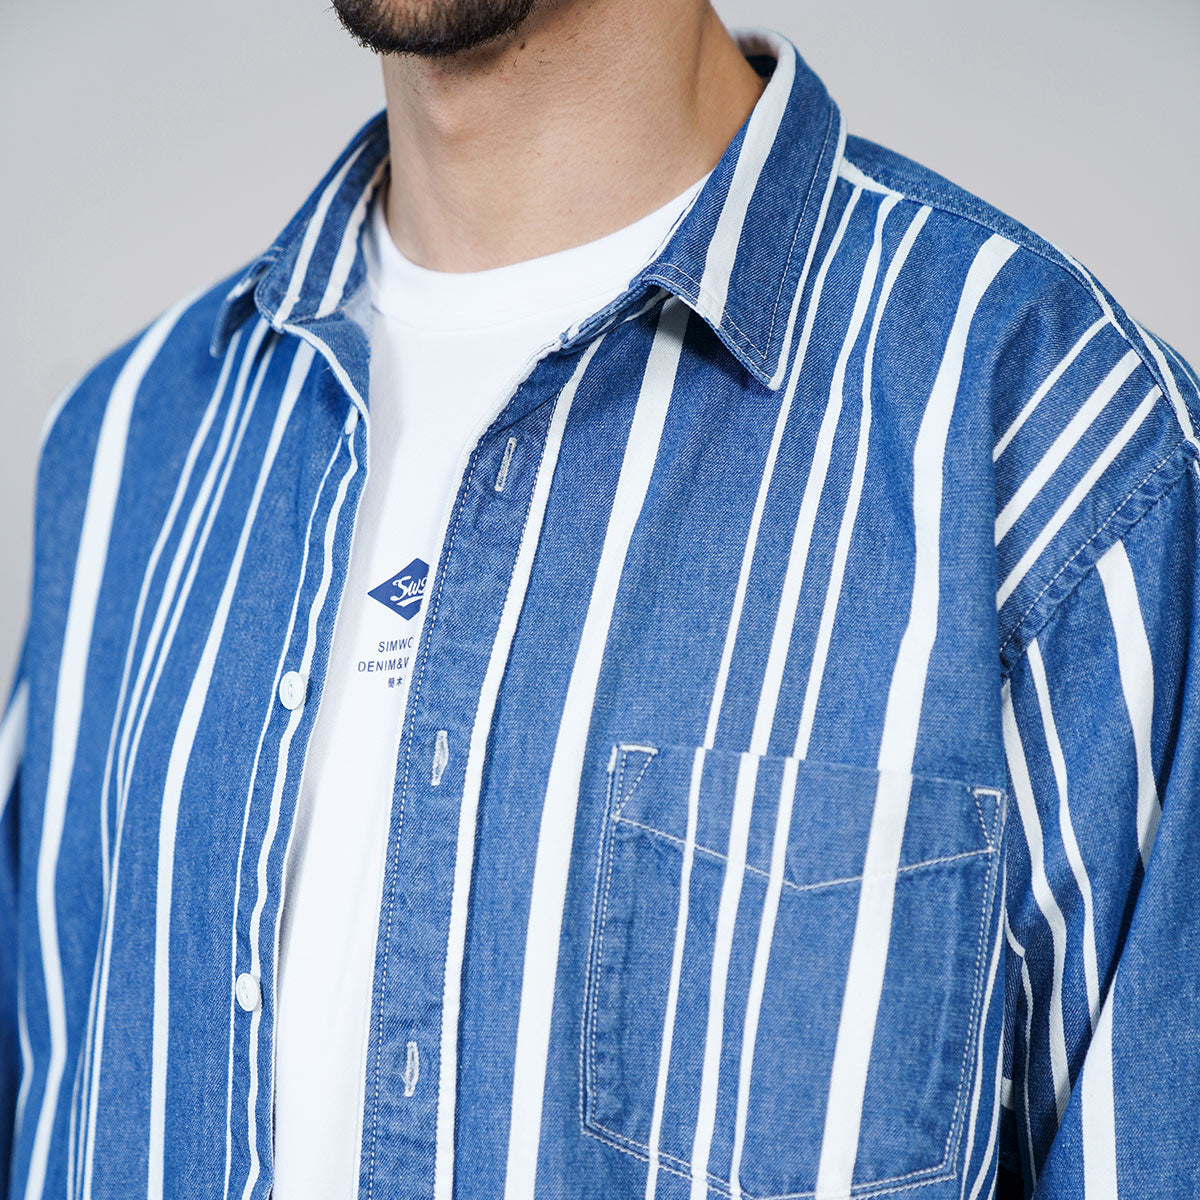 Men's Loose-fit Autumn Washed Striped Denim Shirt With Chest Pockets